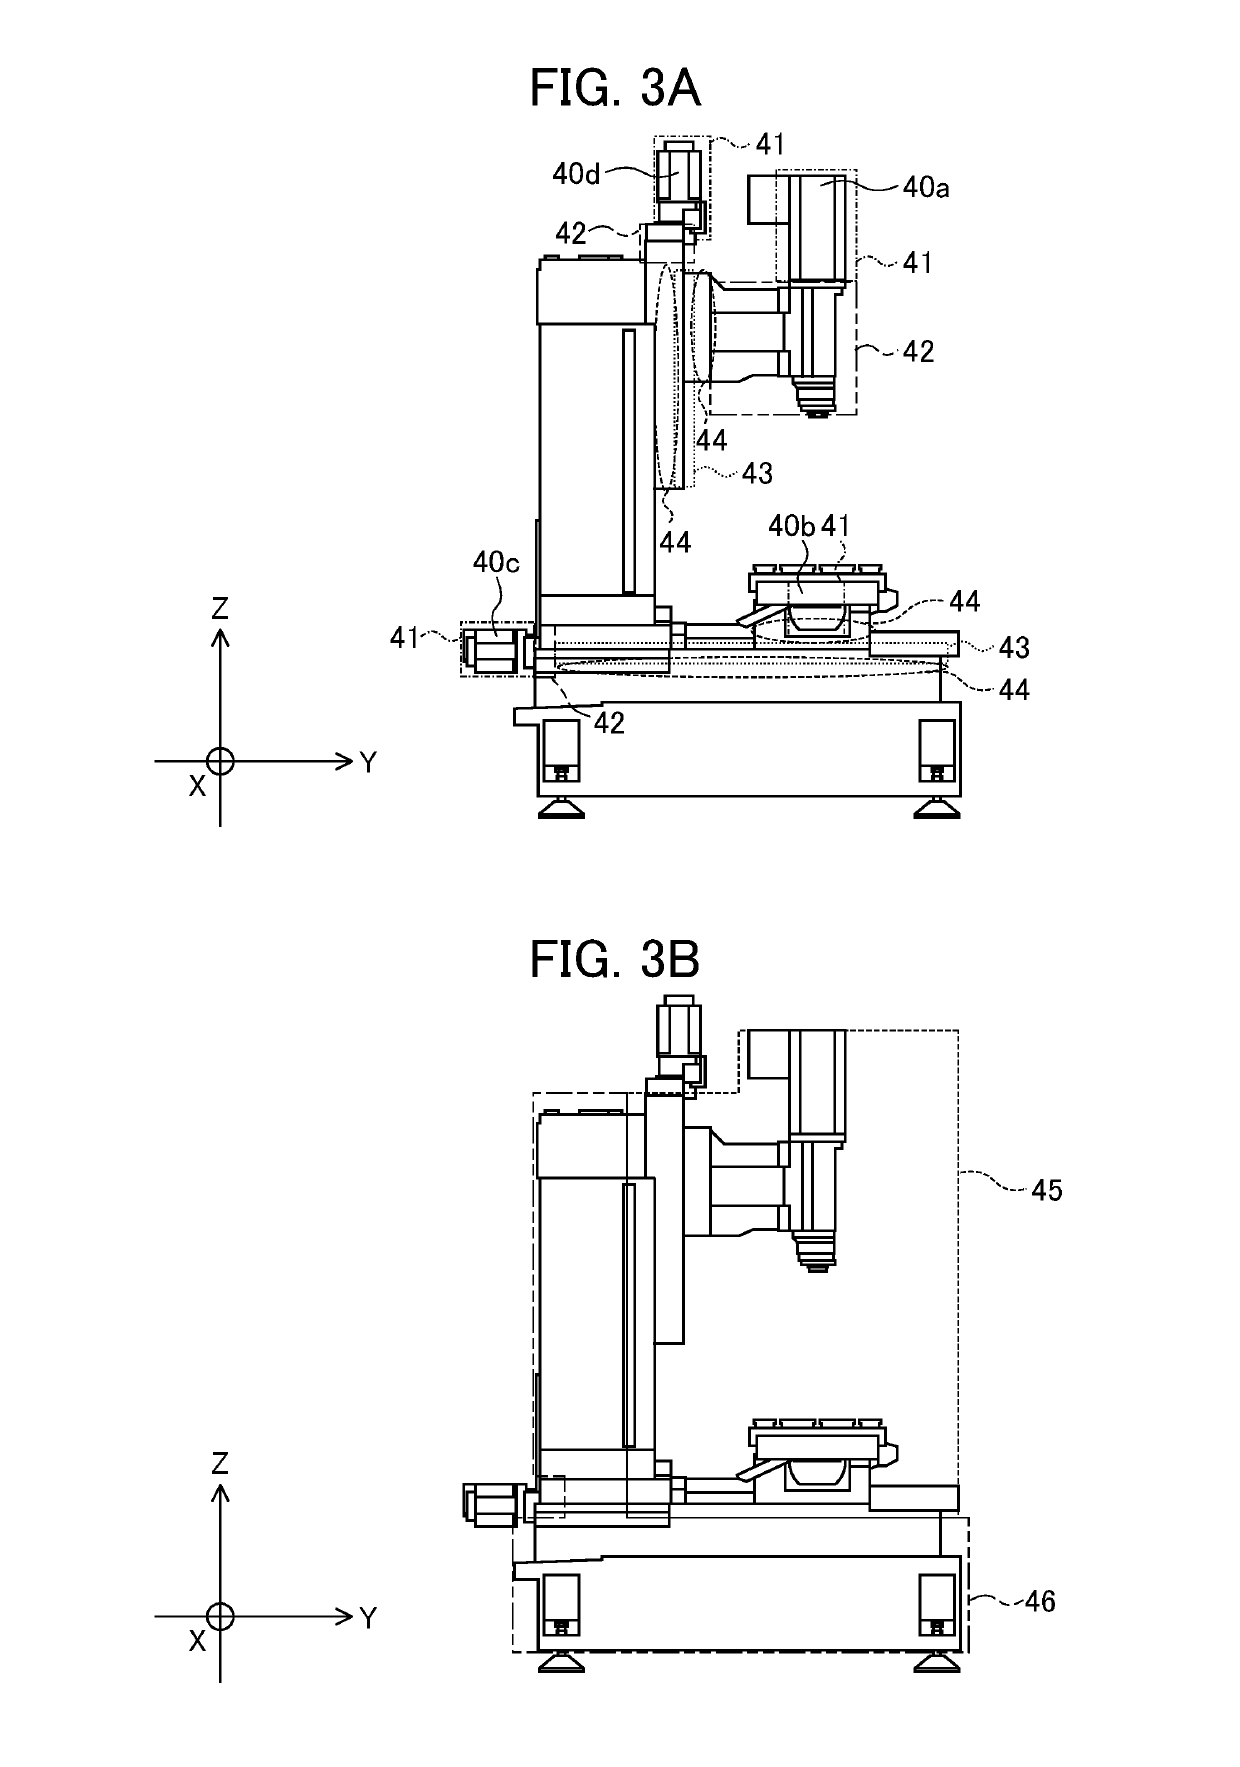 Abnormality determination apparatus, non-transitory computer readable medium encoded with a program, abnormality determination system and abnormality determination method